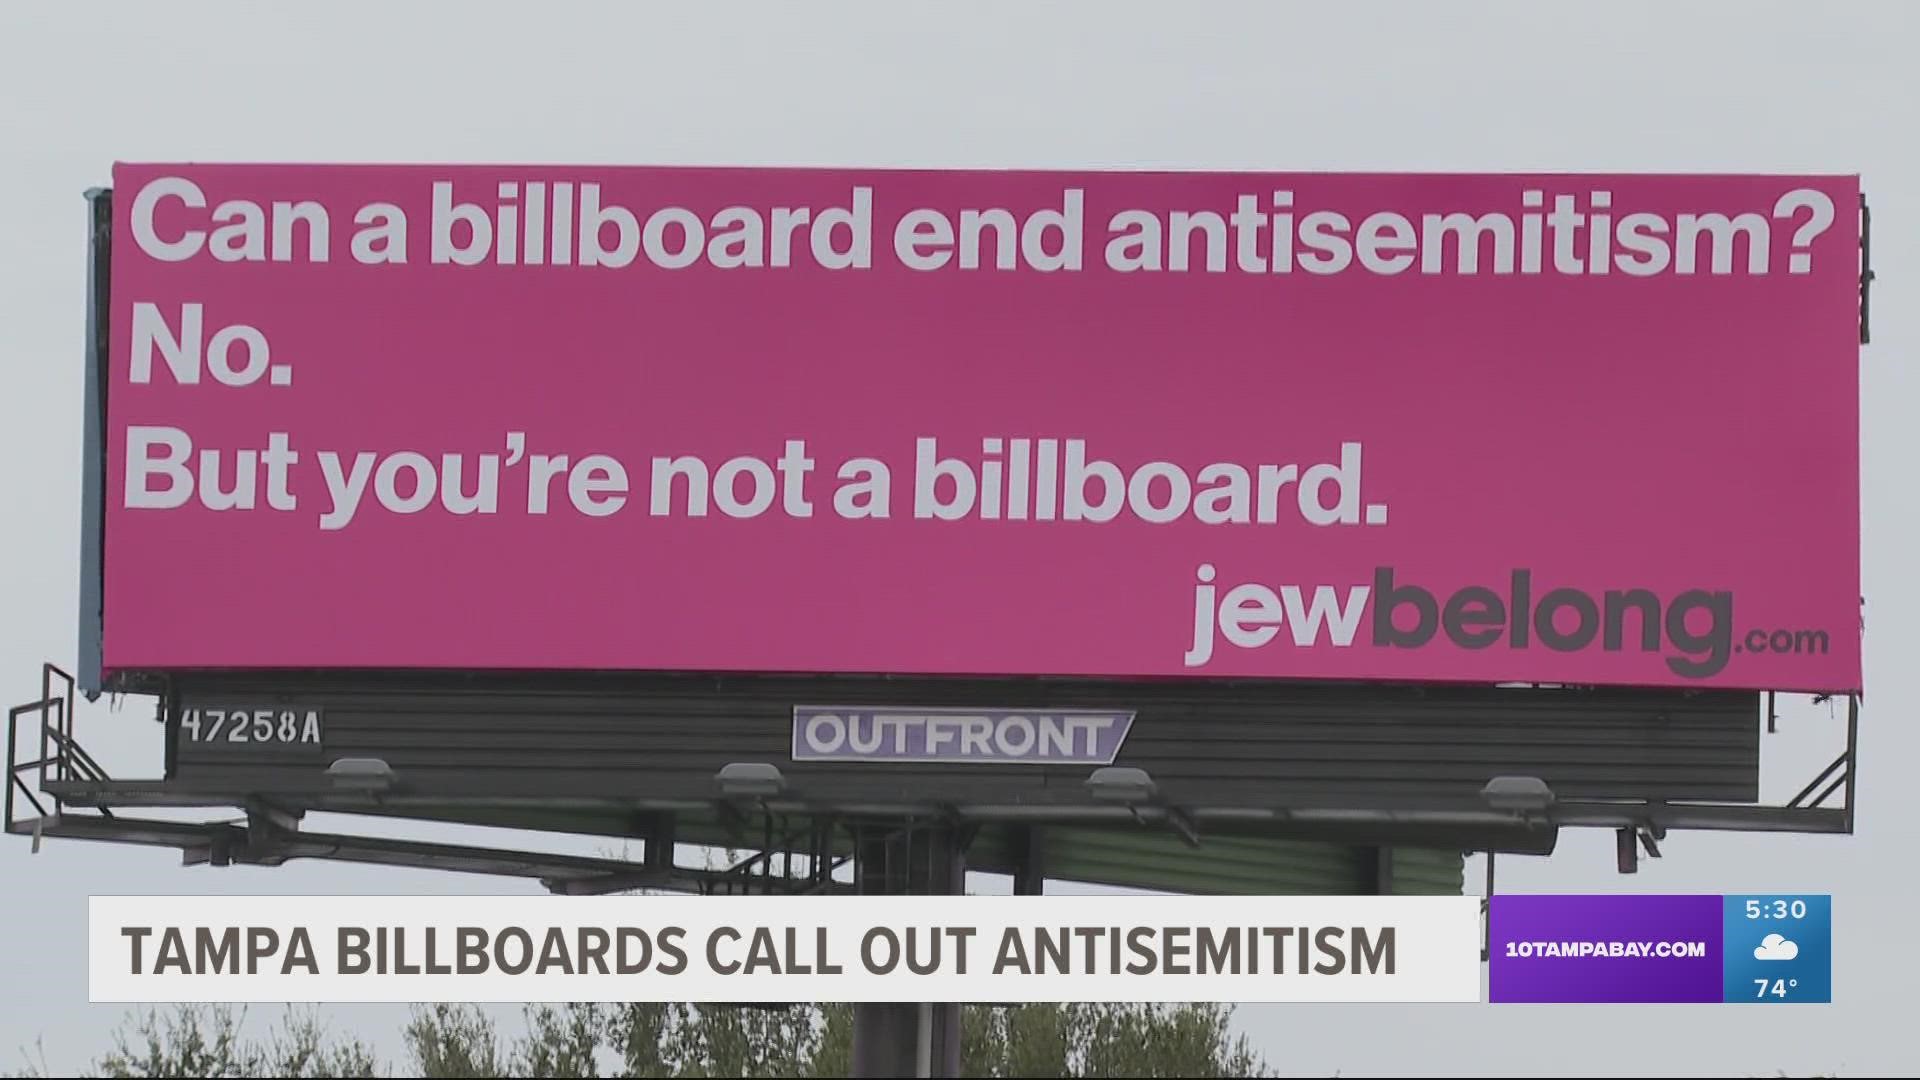 JewBelong is looking to stir up conversations about anti-semitic comments making headlines.